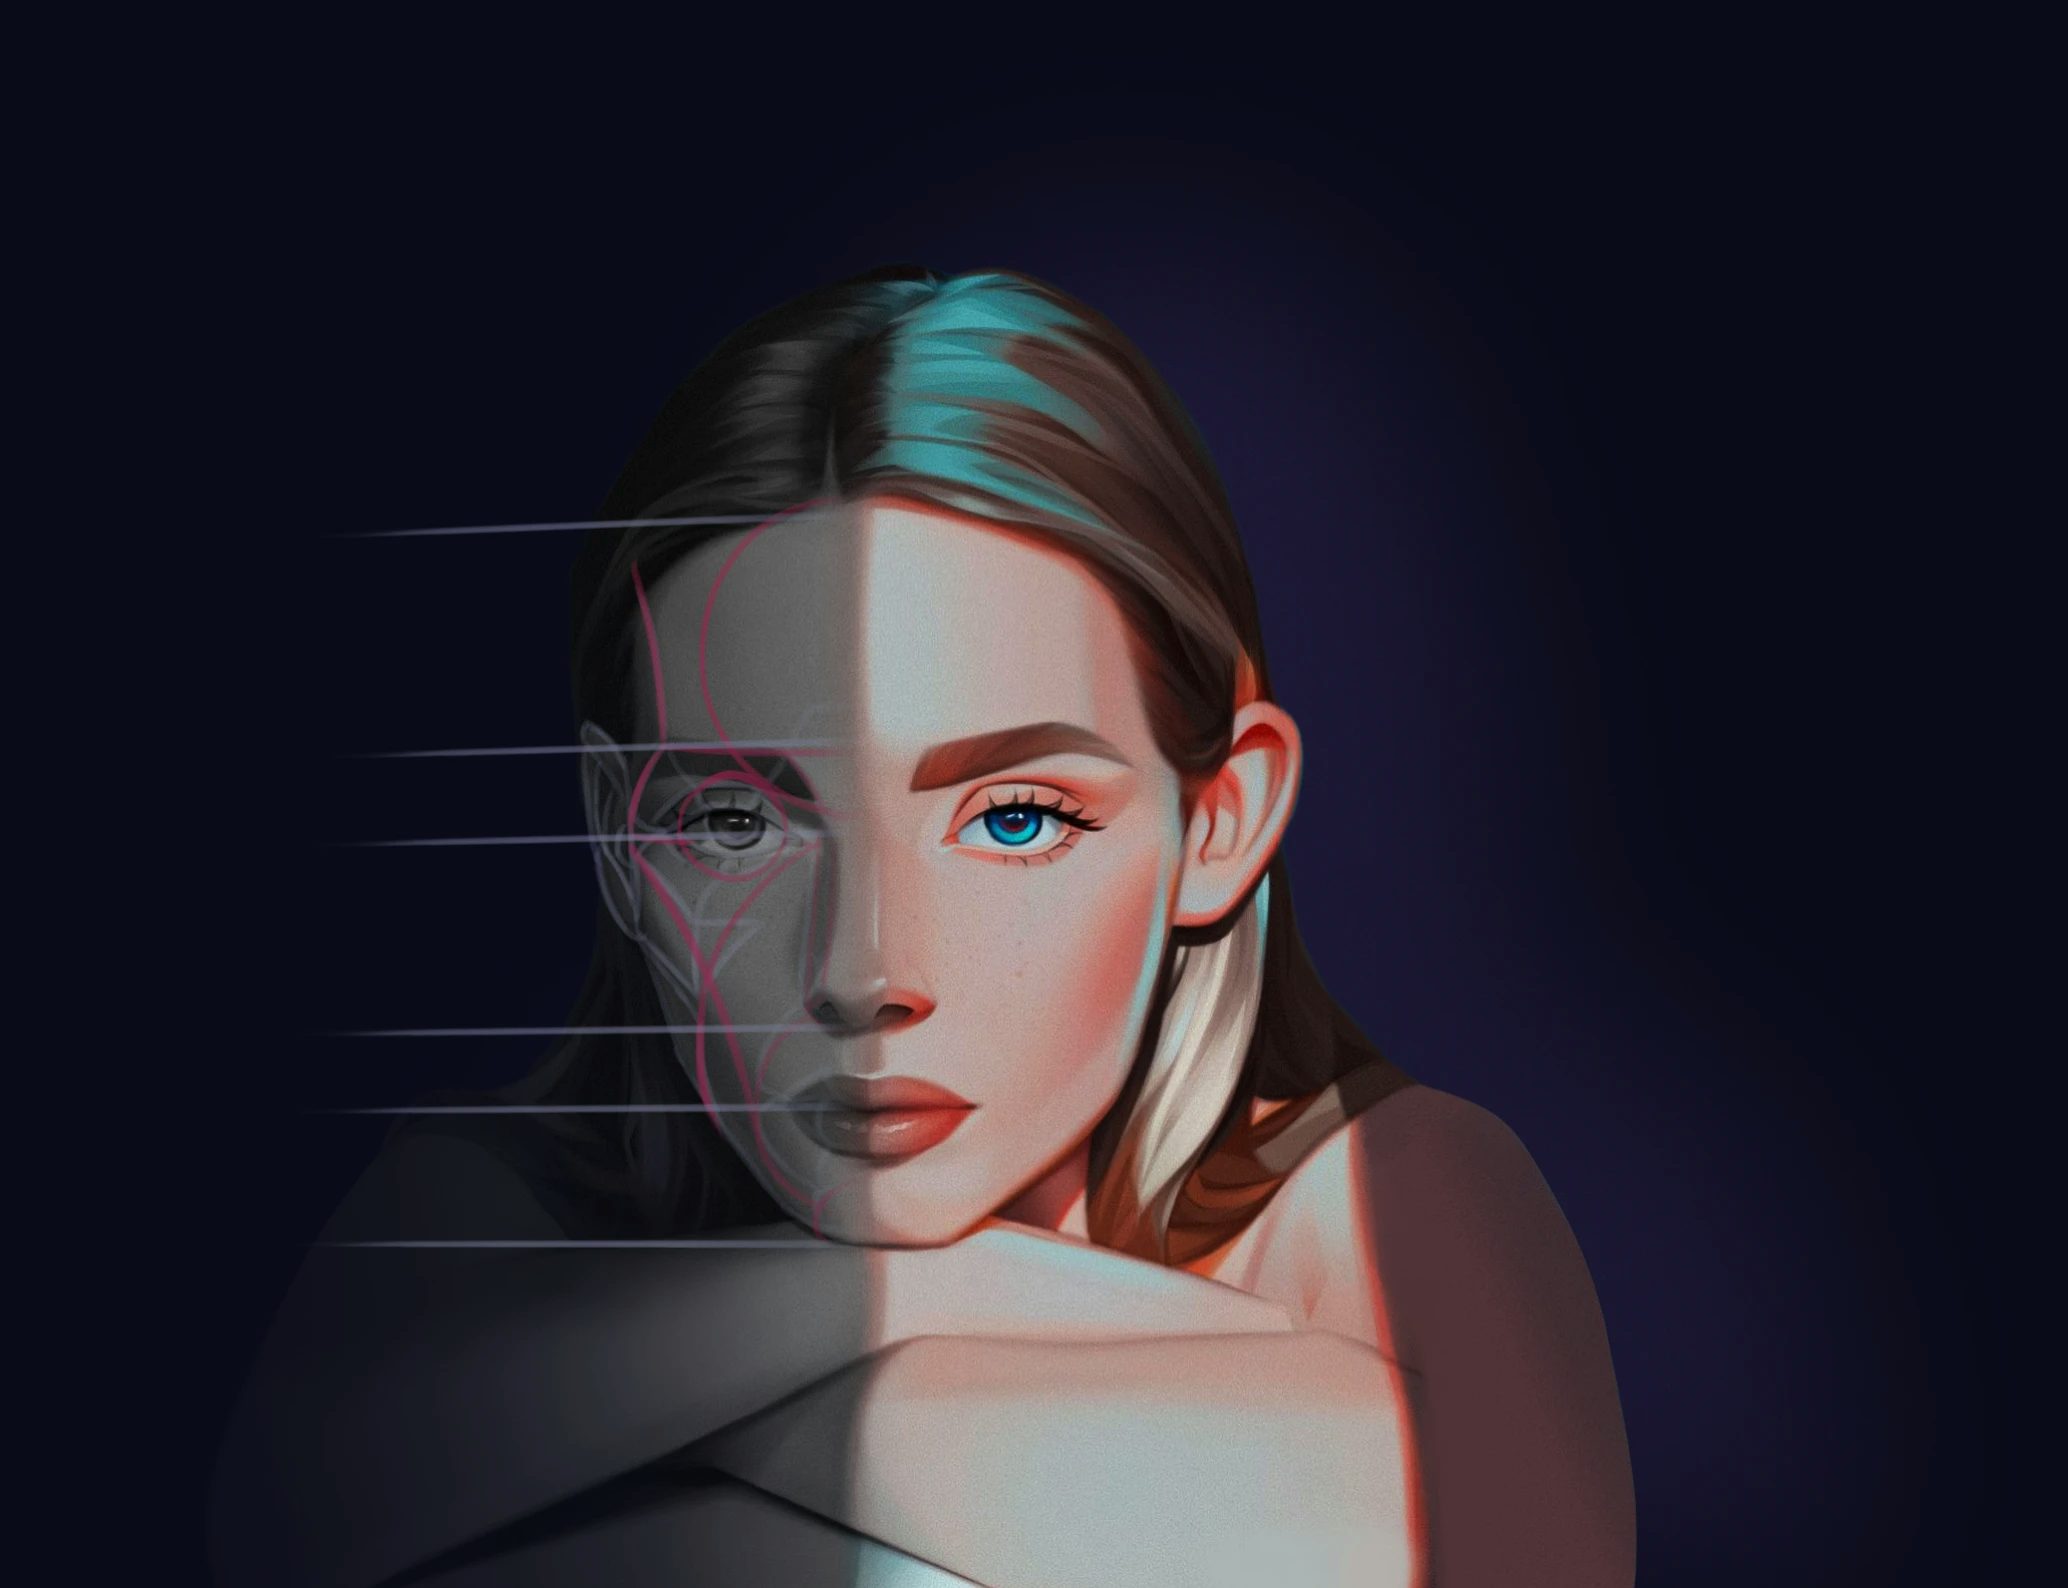  Step-by-Step System to Paint Digital Portraits